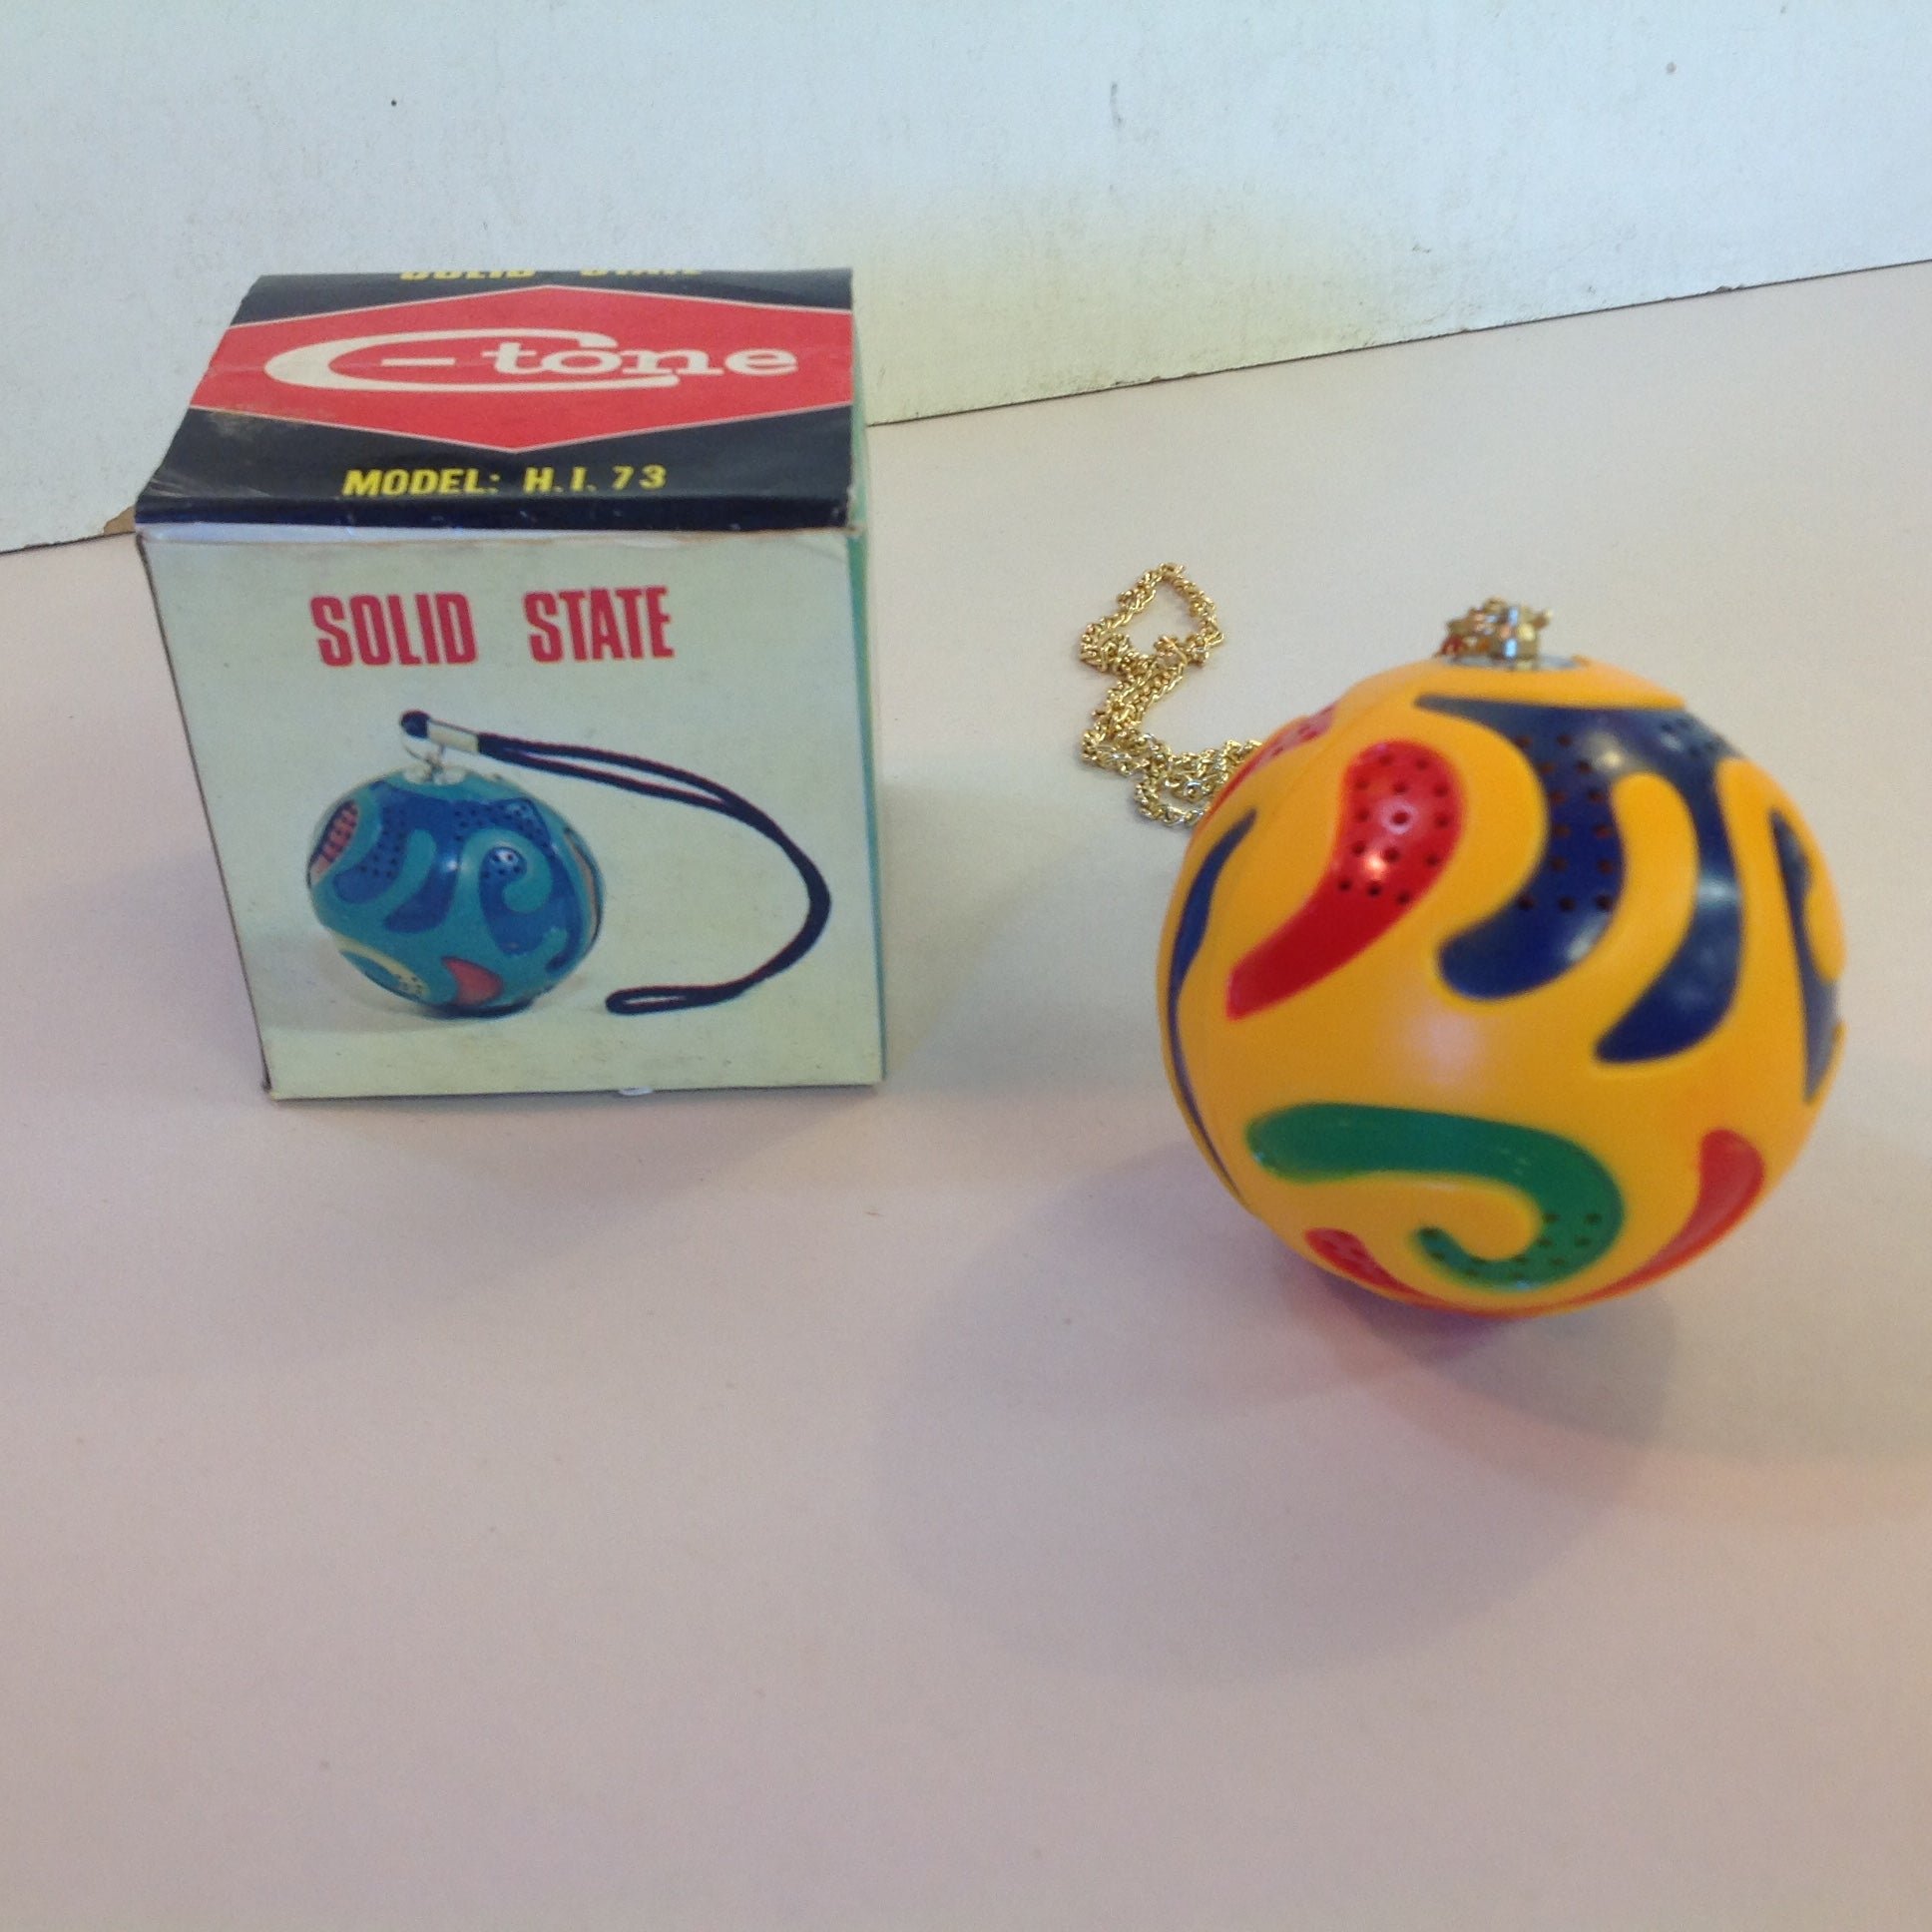 Vintage Solid State C-Tone Model H.I. 73 High Quality Unbreakable Micro Radio Yellow Globe w/Chain and Box Hong Kong